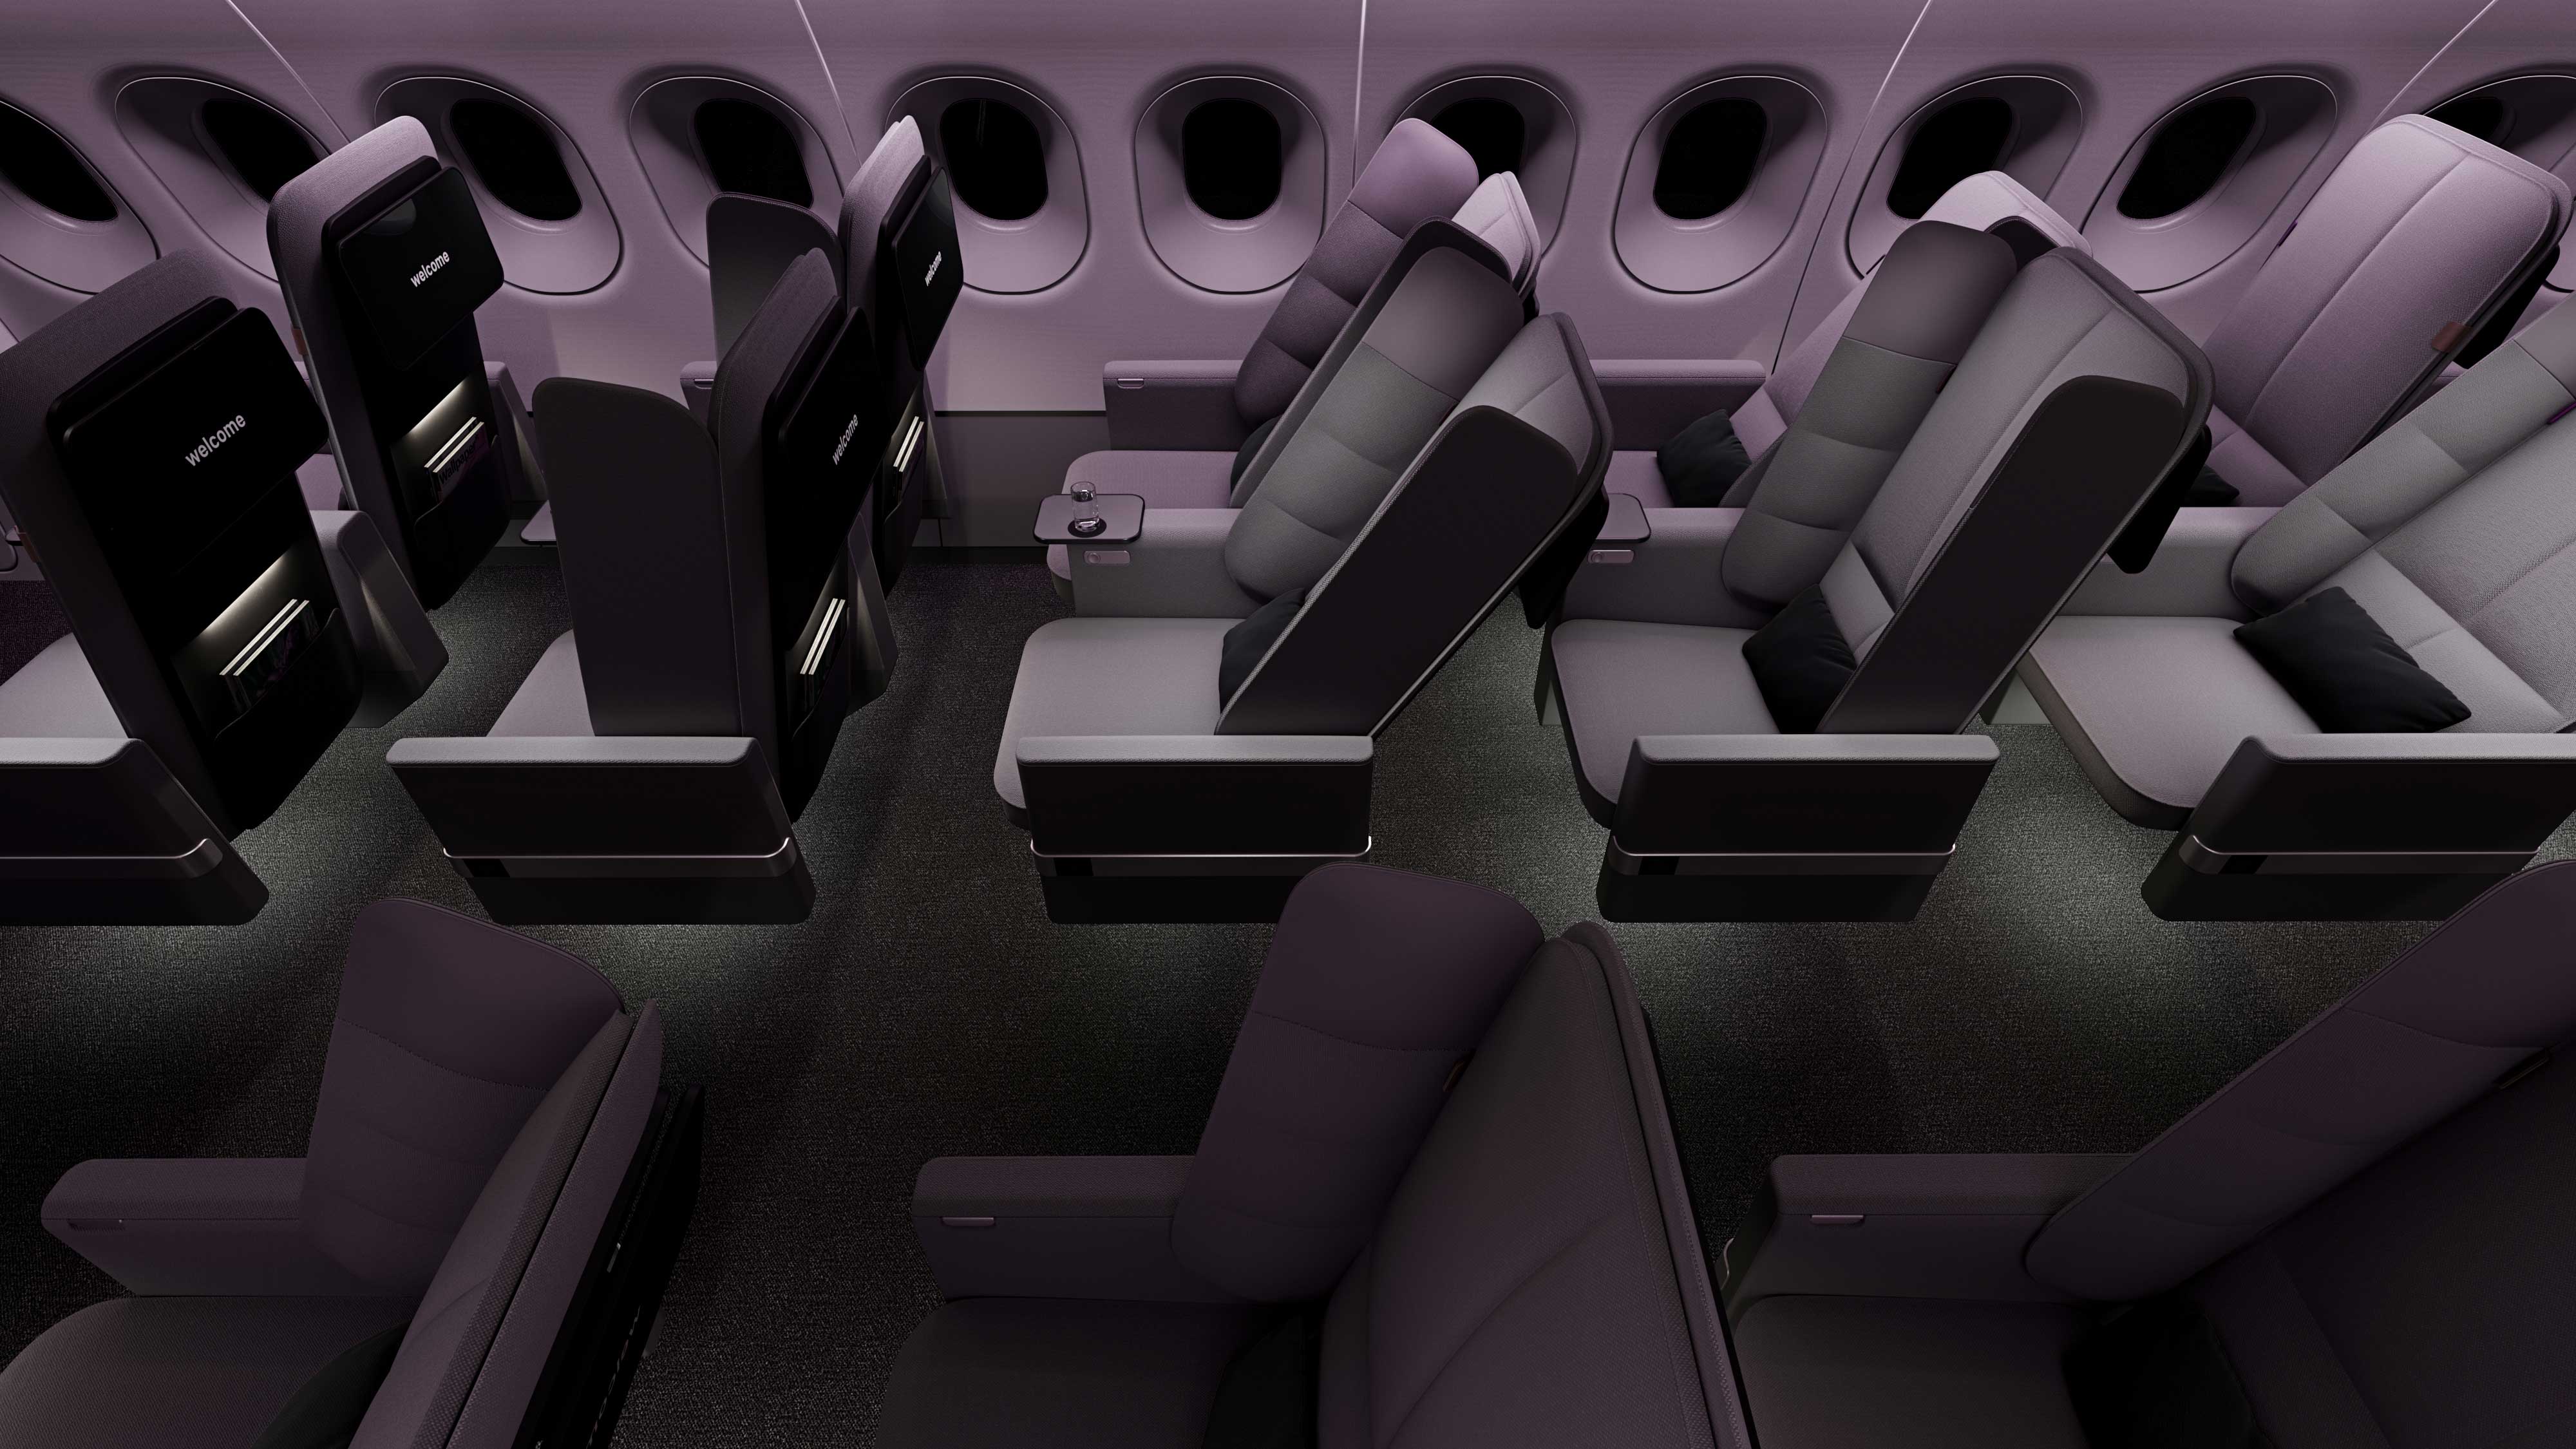 This new airplane seat could make it easier to sleep in economy